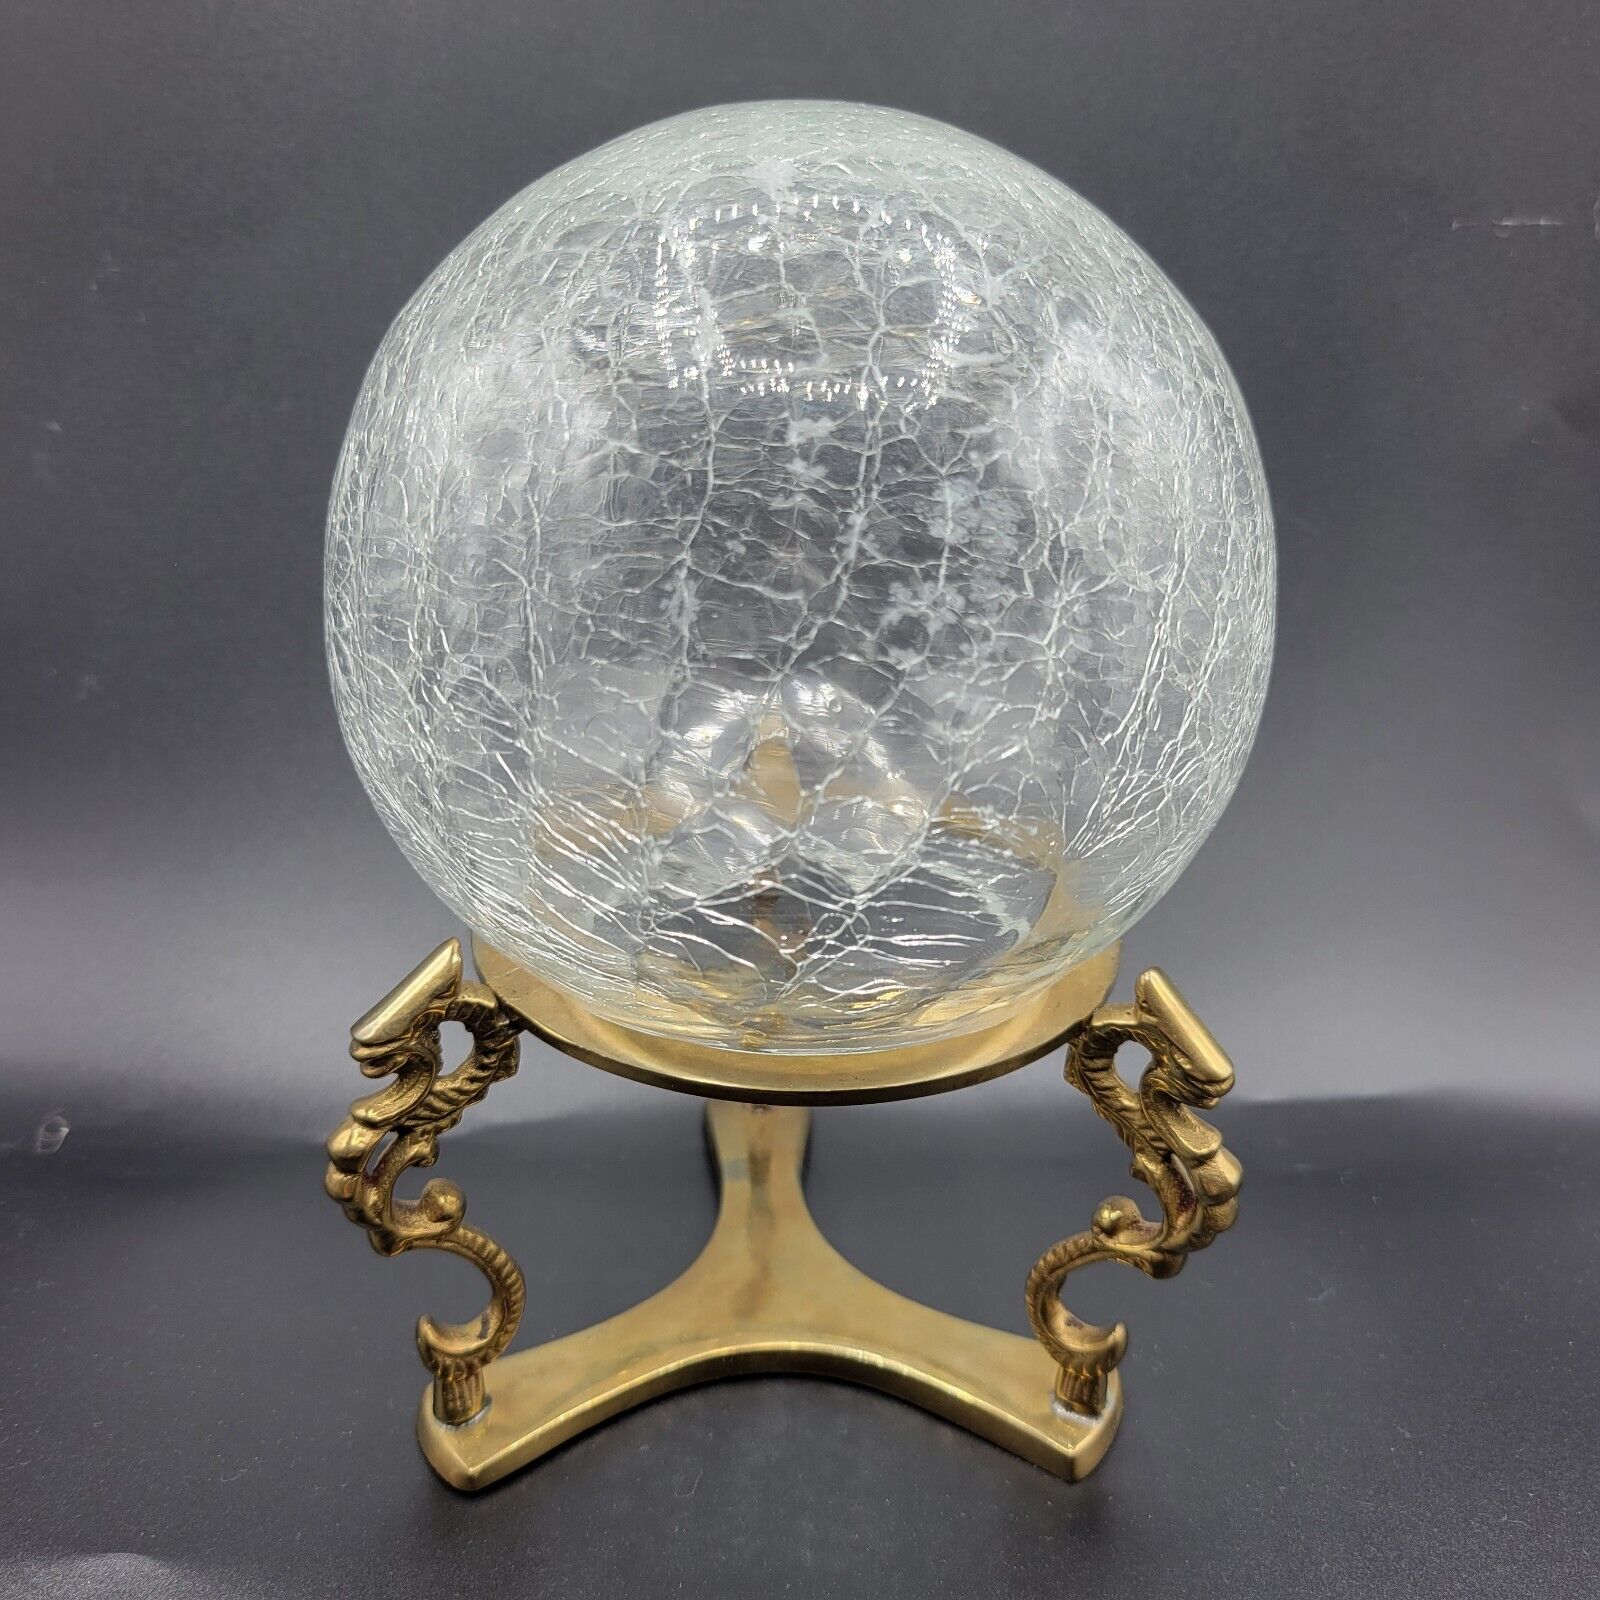 Vintage Crackle Glass Bubble Orb Bowl Sphere On Solid Brass Stand With 3 Dragons